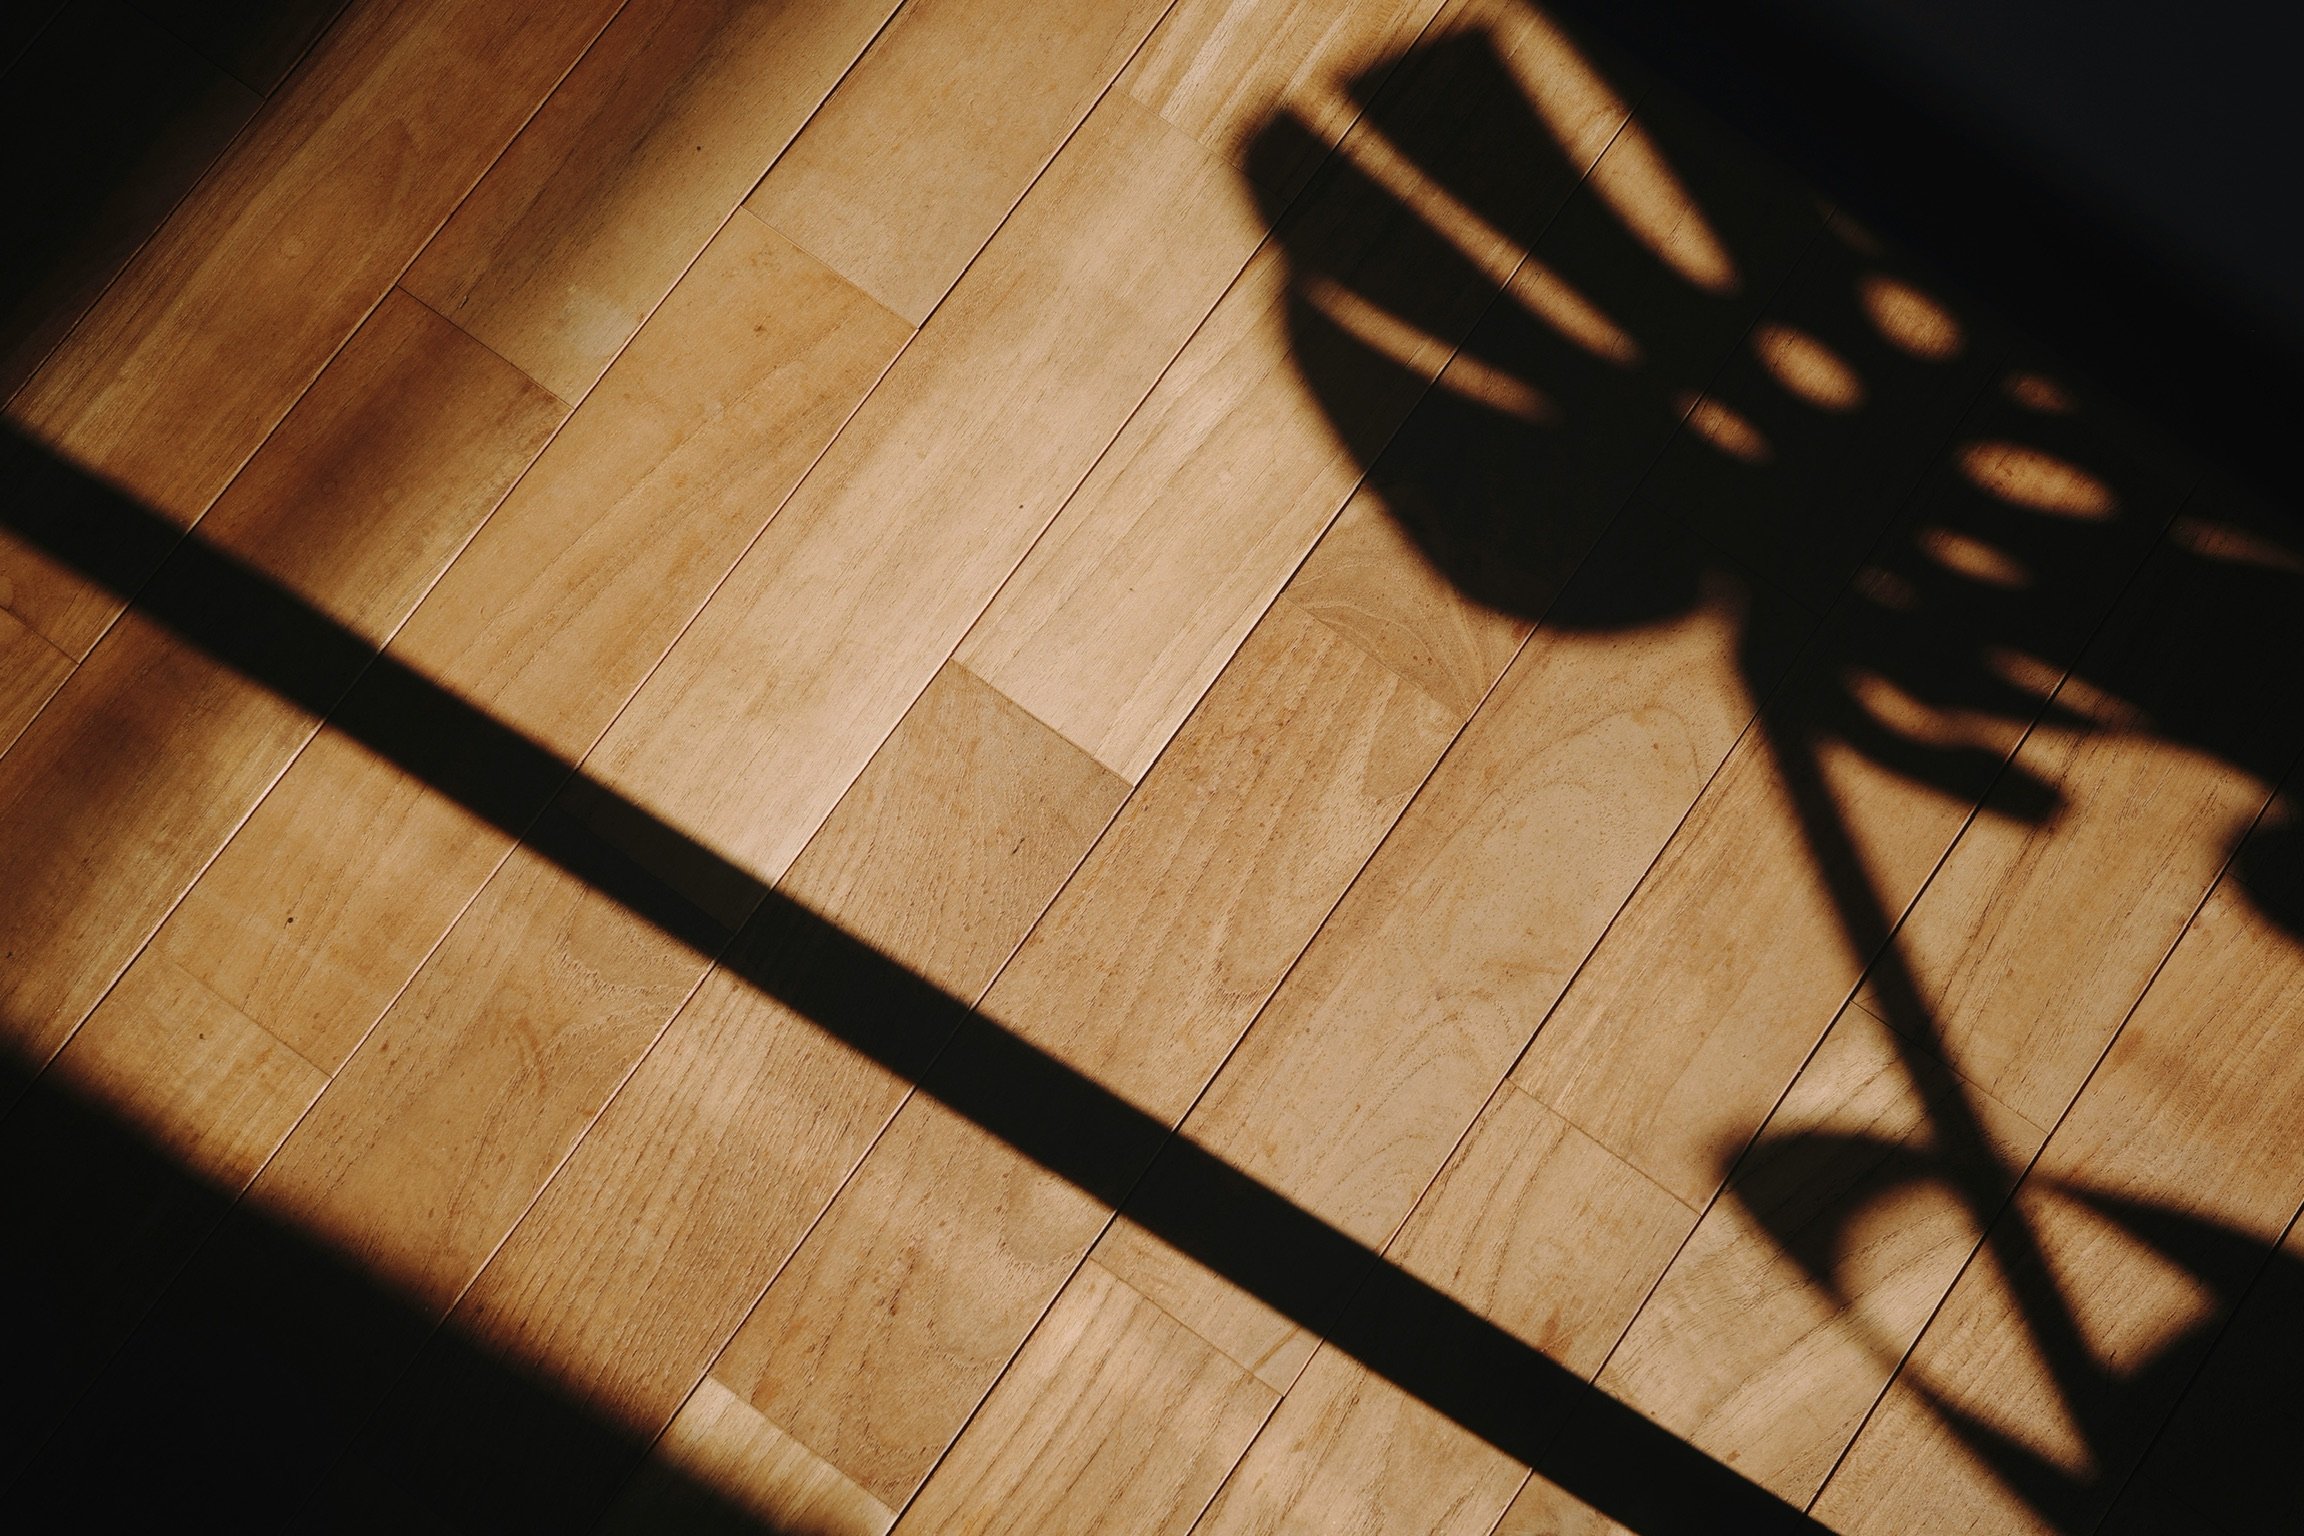 Wooden paneled floor with shadows of monstera plant casted on it.